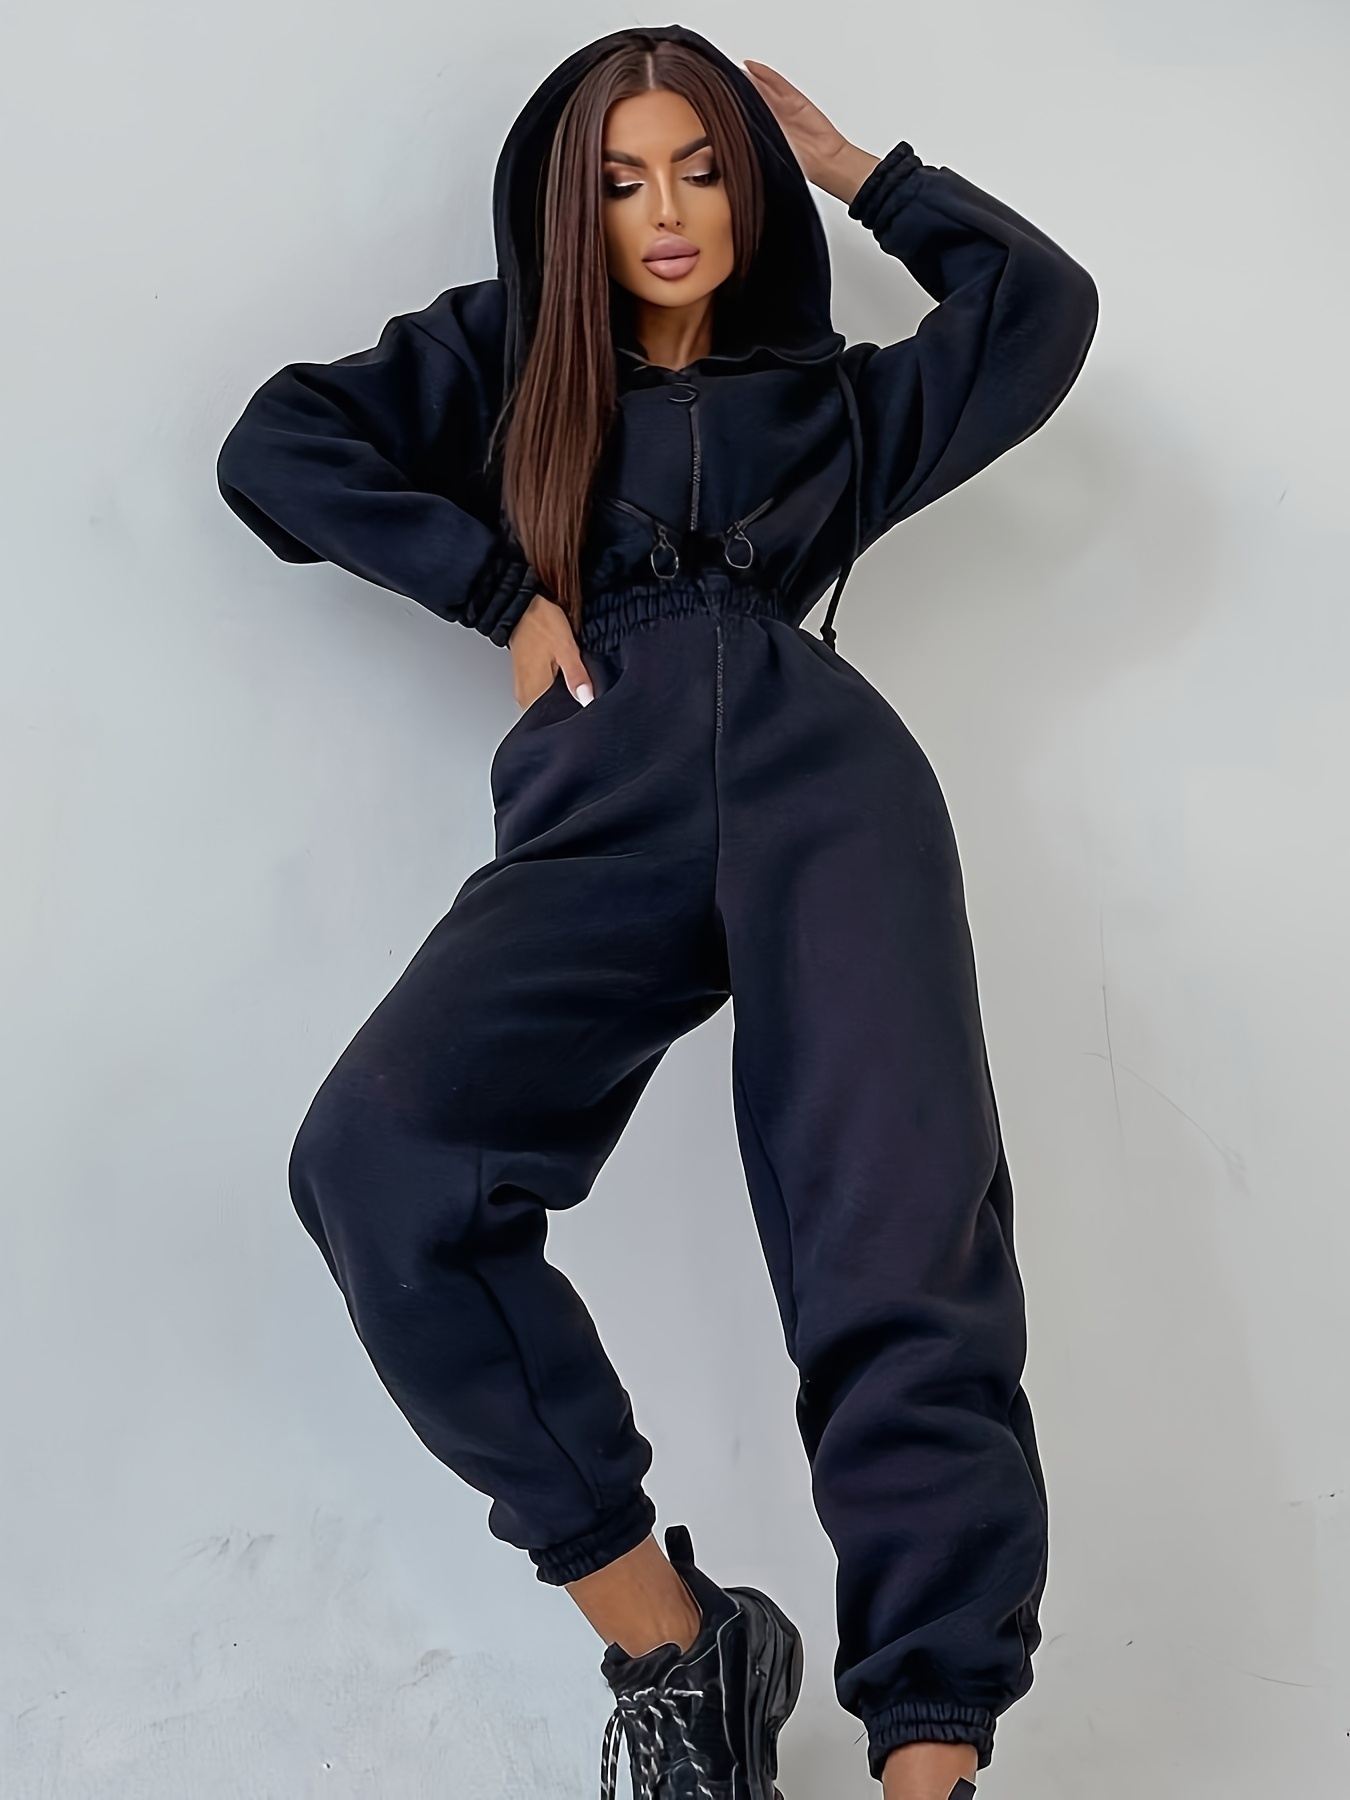 New Hooded Jumpsuits Zip Up One Piece Outfit Romper Pockets S